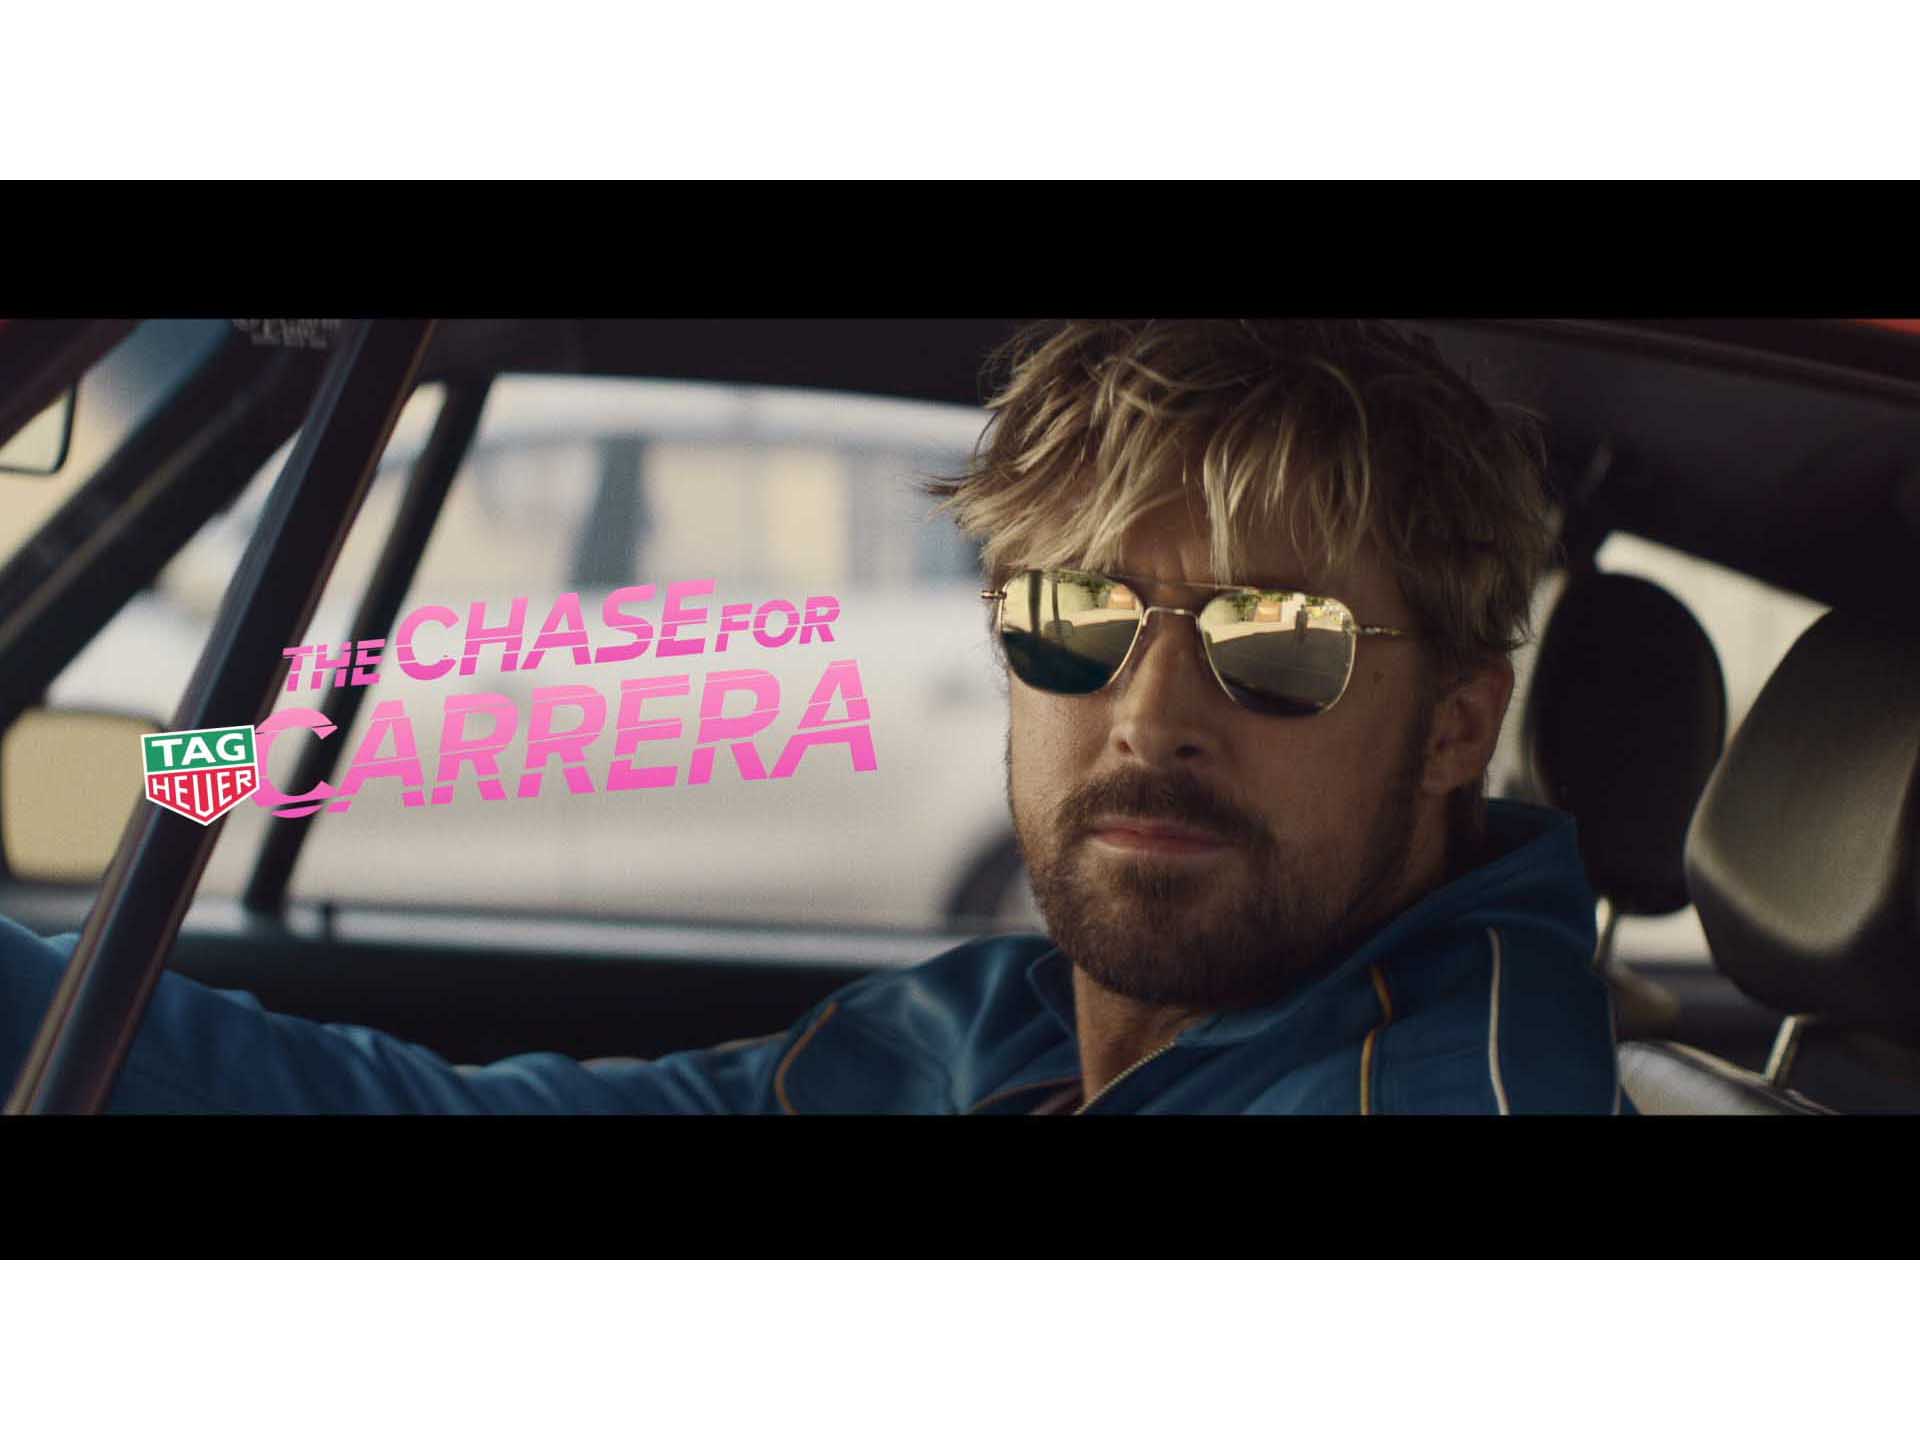 New action-packed campaign by DDB Paris for TAG Heuer Carrera's 60th anniversary featuring Hollywood star Ryan Gosling